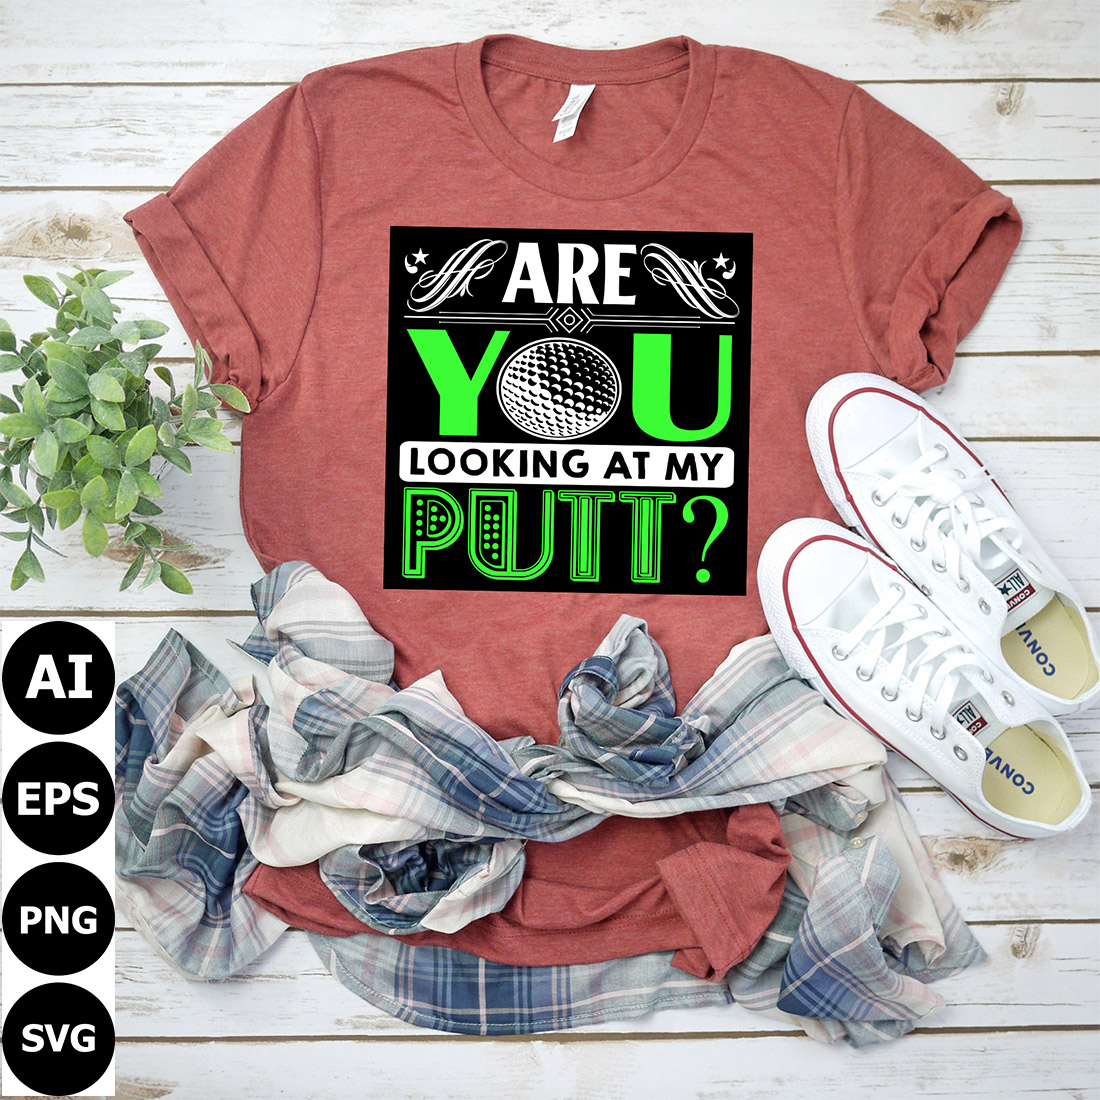 Are You Looking At My Putt? Typography T Shirt Design cover image.